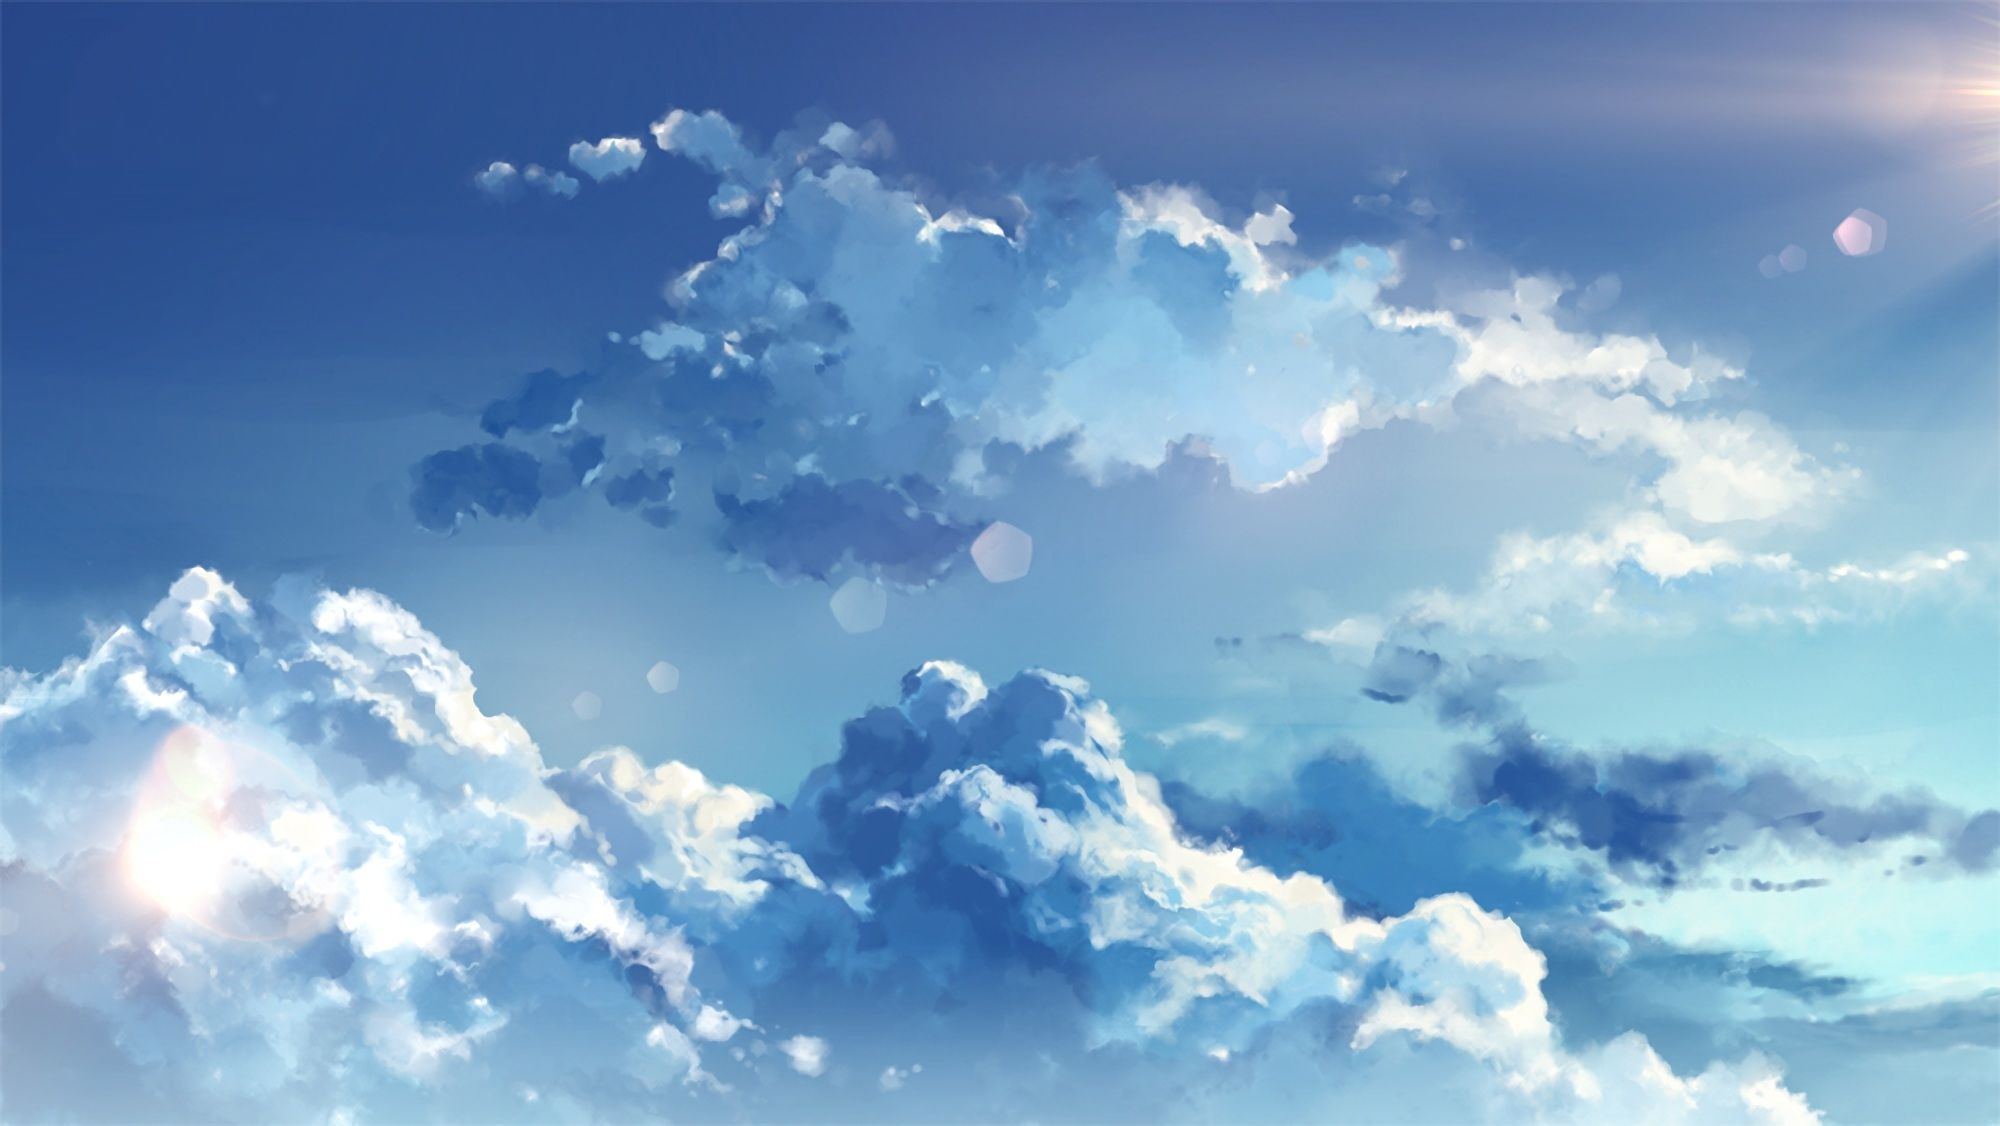 Anime, manga cloud painting. 4K sky wallpaper, moody, colorful background.  A painted cloudscape, with pink and white clouds. Scenery of the sky at  dusk or dawn. Drawing illustration. Stock Illustration | Adobe